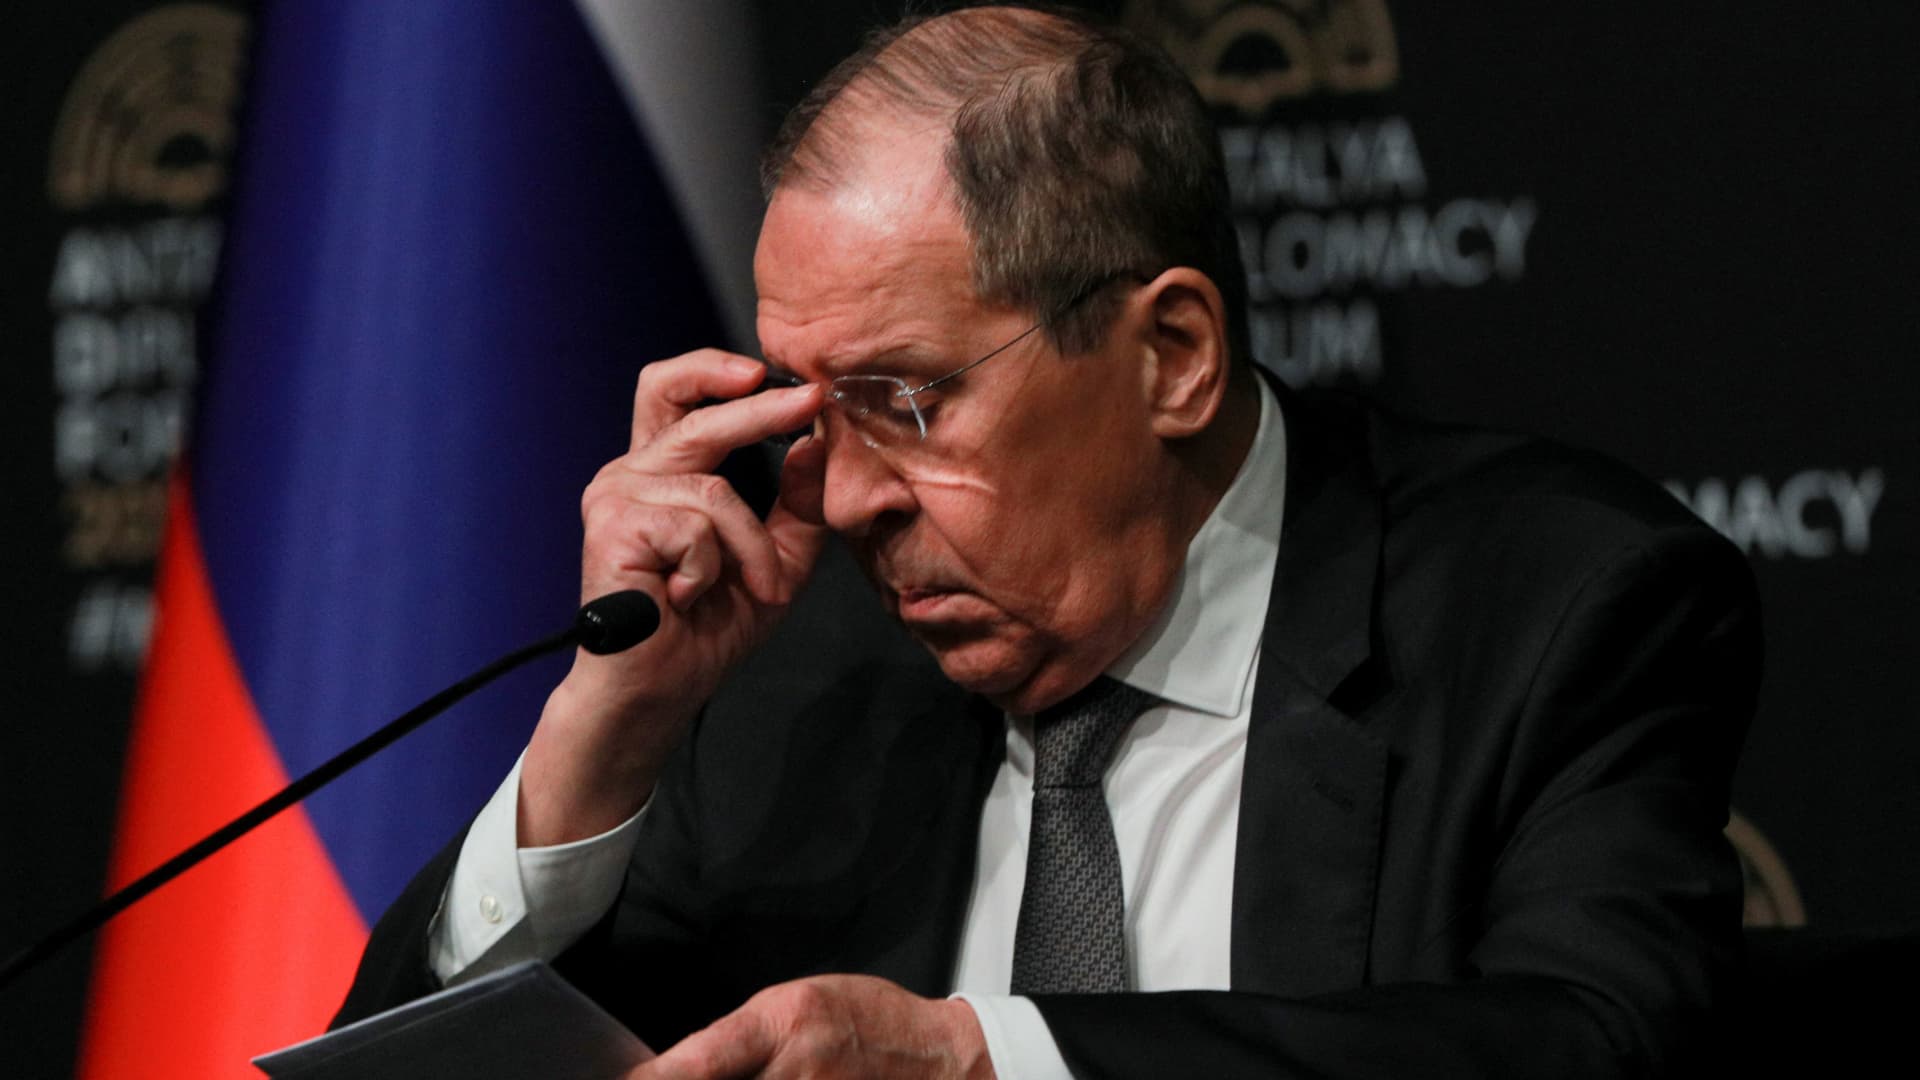 Russian Foreign Minister Sergei Lavrov adjusts his glasses during a news conference after meeting with his counterparts Ukrainian Dmytro Kuleba and Turkish Mevlut Cavusoglu, amid Russia's invasion of Ukraine, in Antalya, Turkey March 10, 2022.